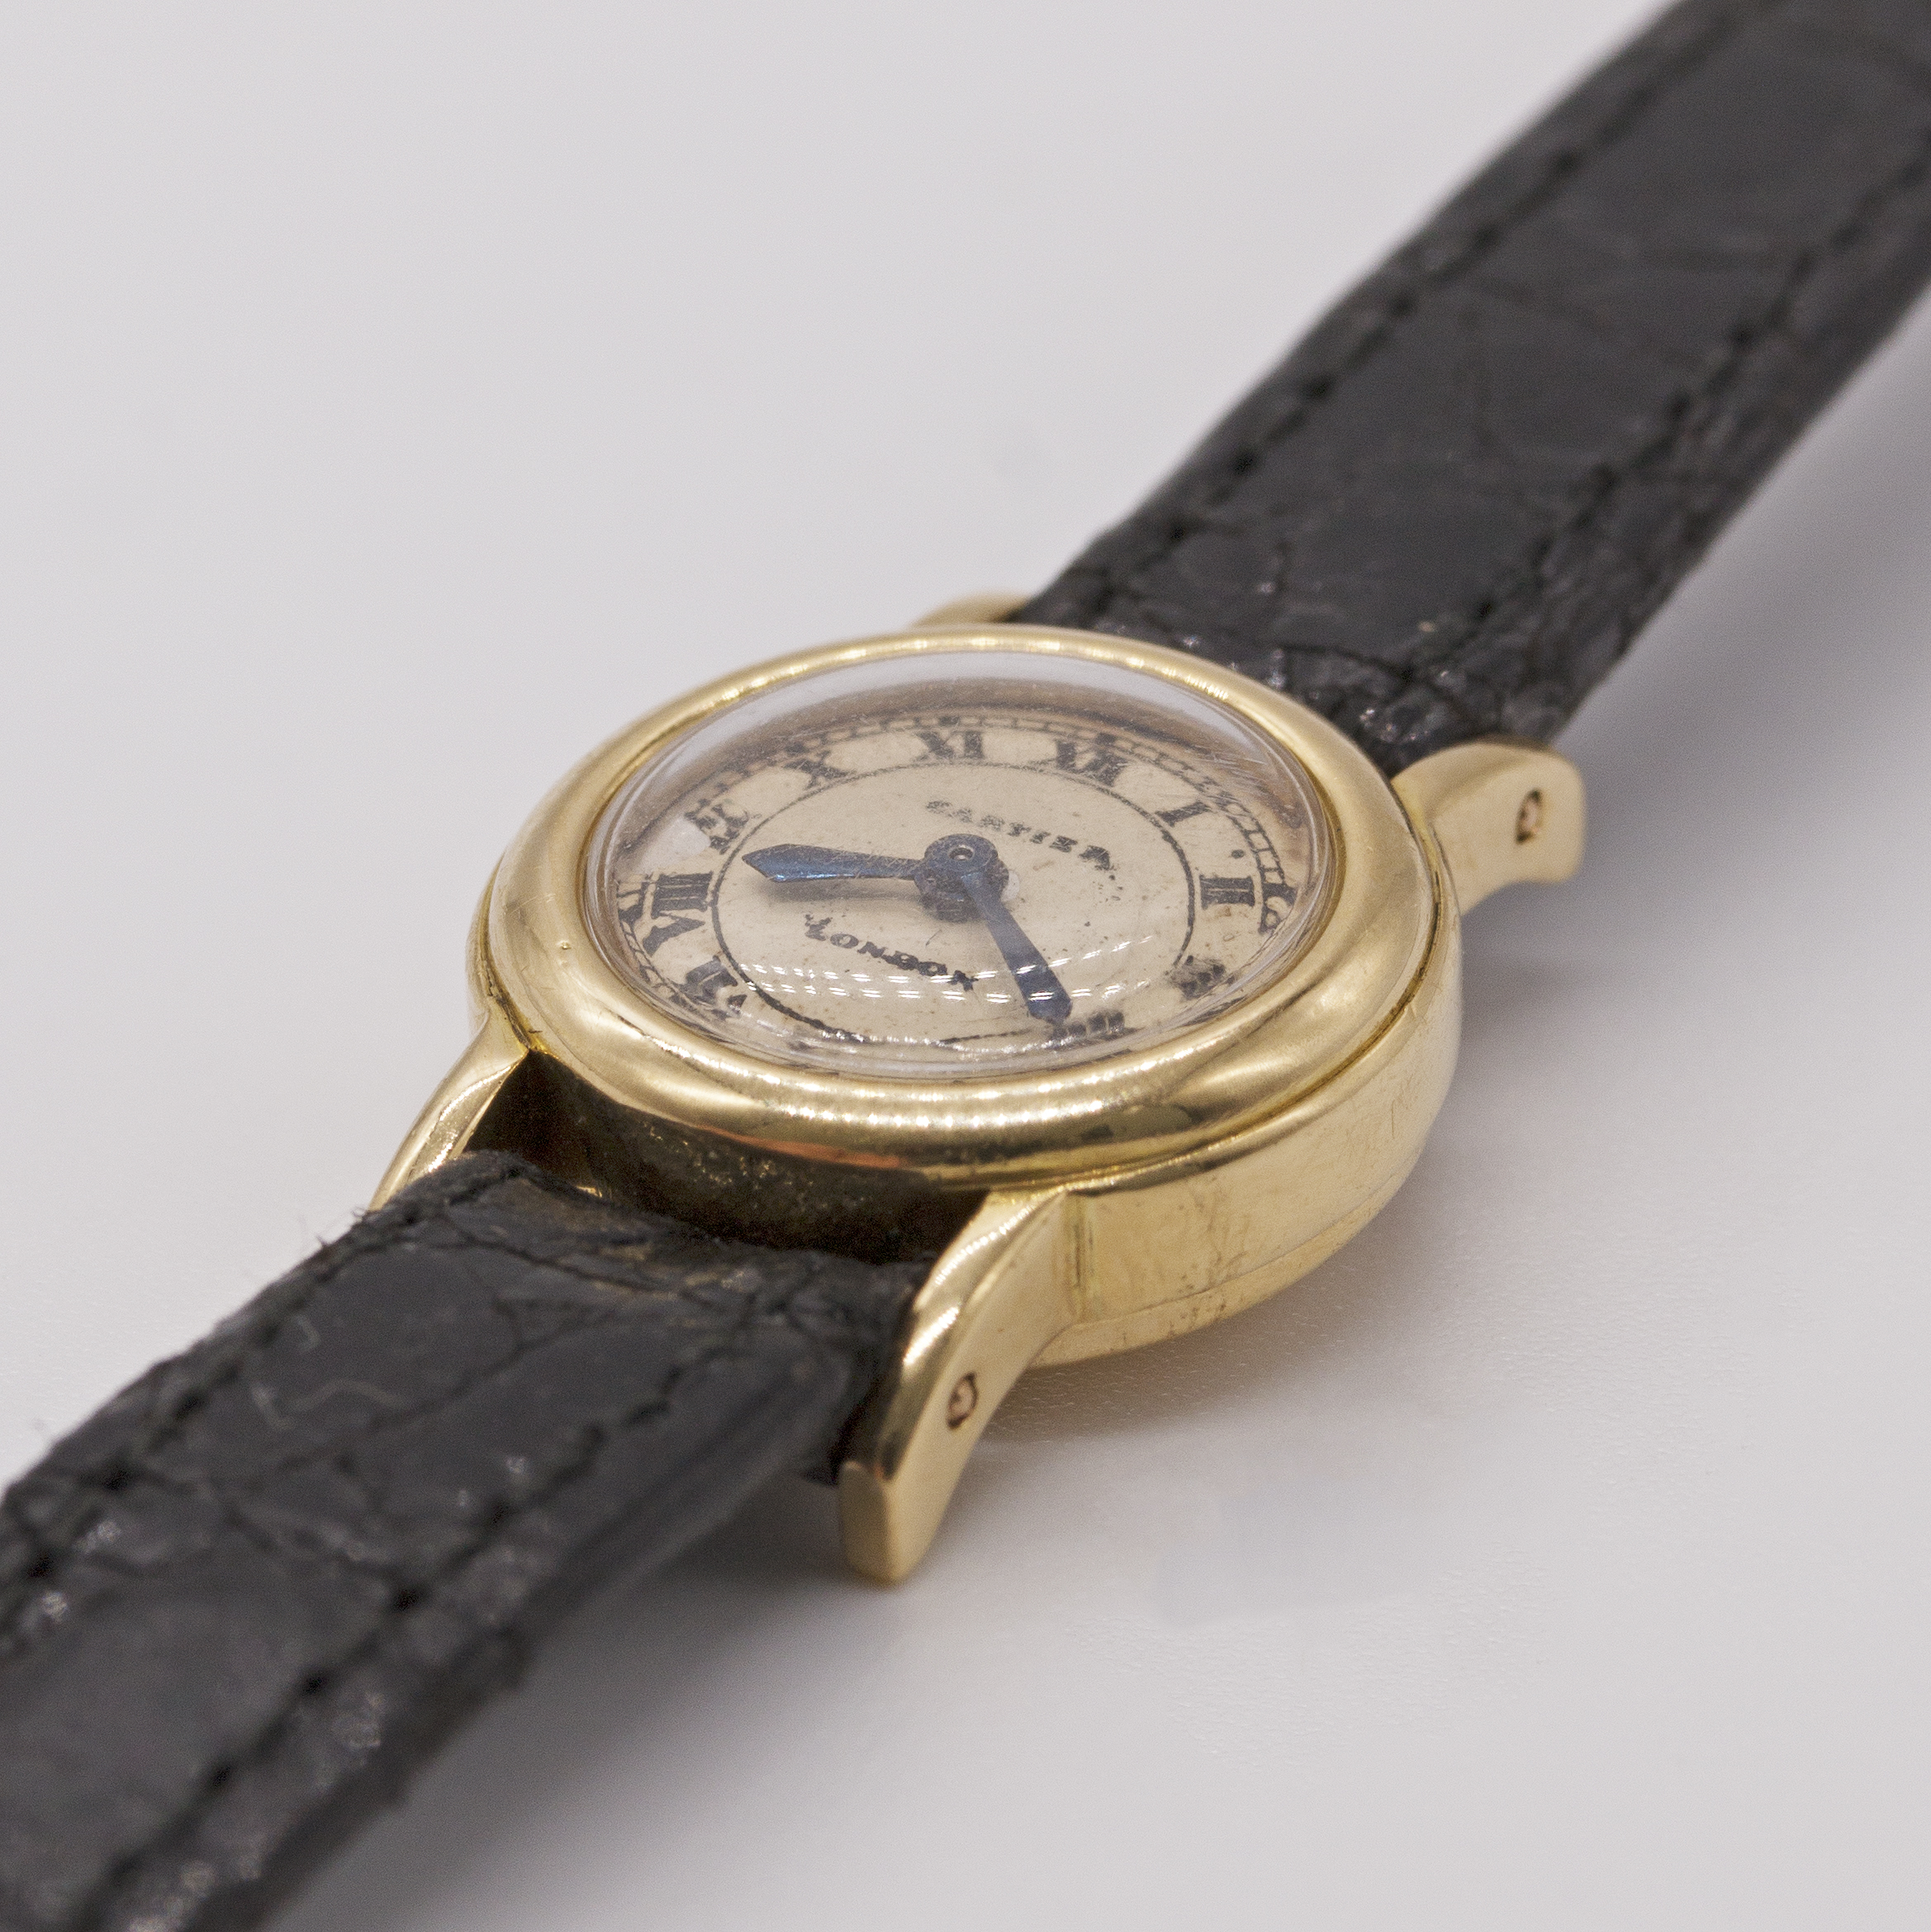 A RARE LADIES 18K SOLID GOLD CARTIER LONDON BACKWIND WRIST WATCH CIRCA 1961, WITH LONDON HALLMARKS - Image 3 of 8